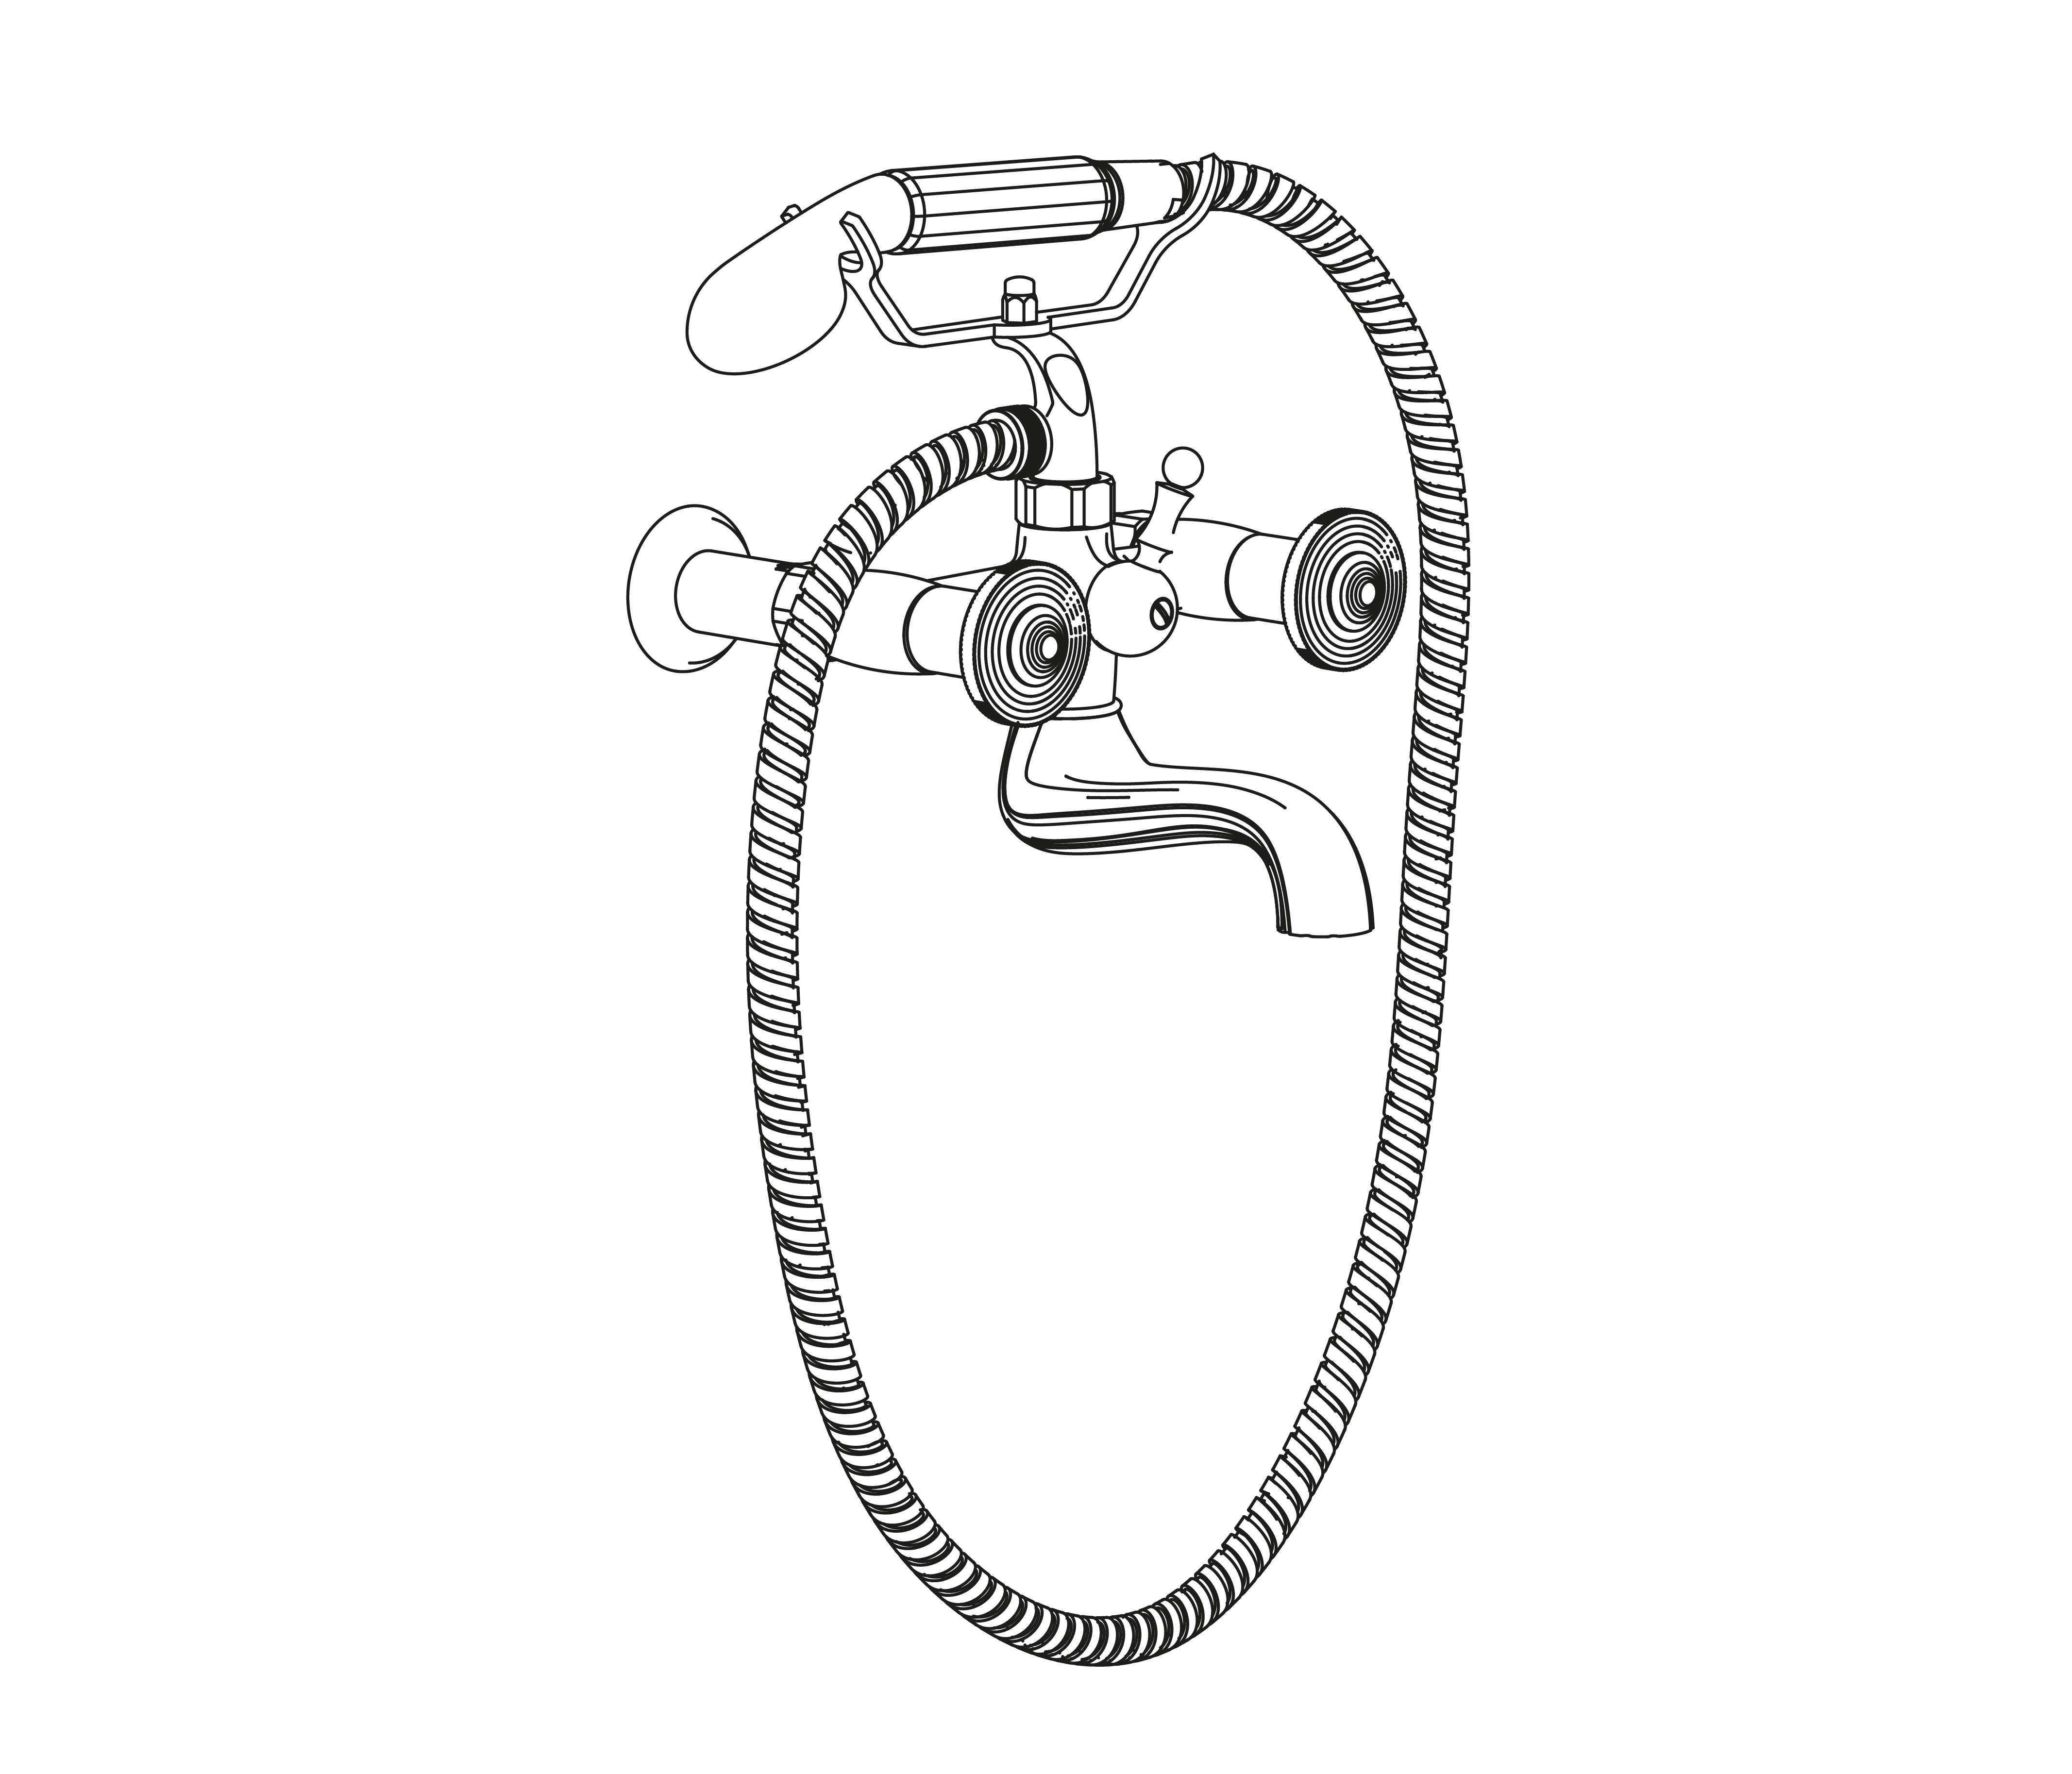 C37-3201 Wall mounted bath and shower mixer